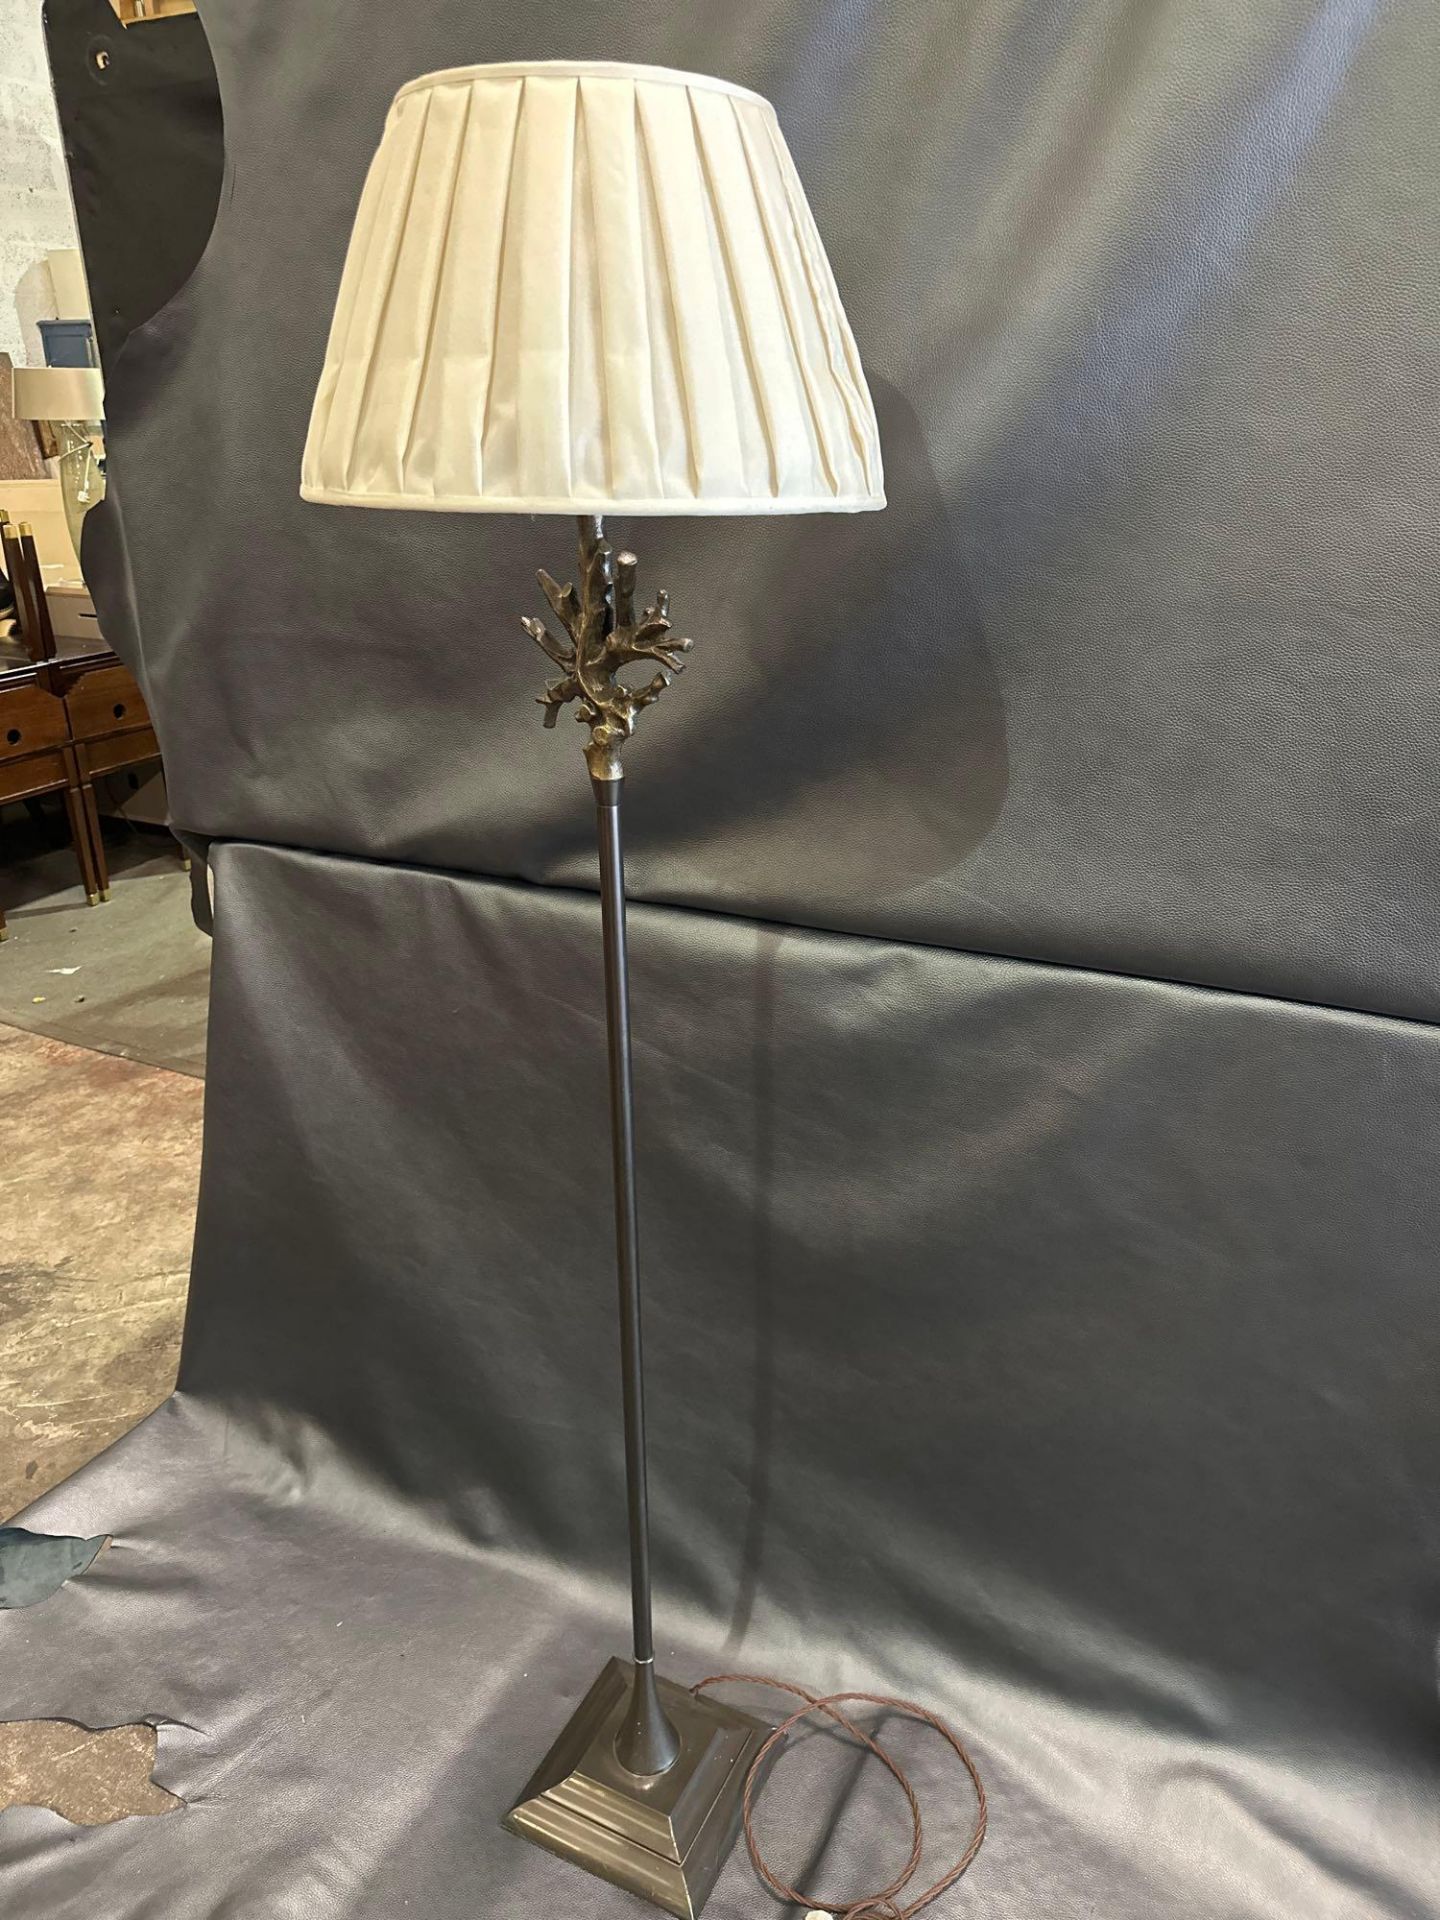 Heathfield And Co Coral Standard Lamp With Linen Shade 180cm - Image 5 of 5